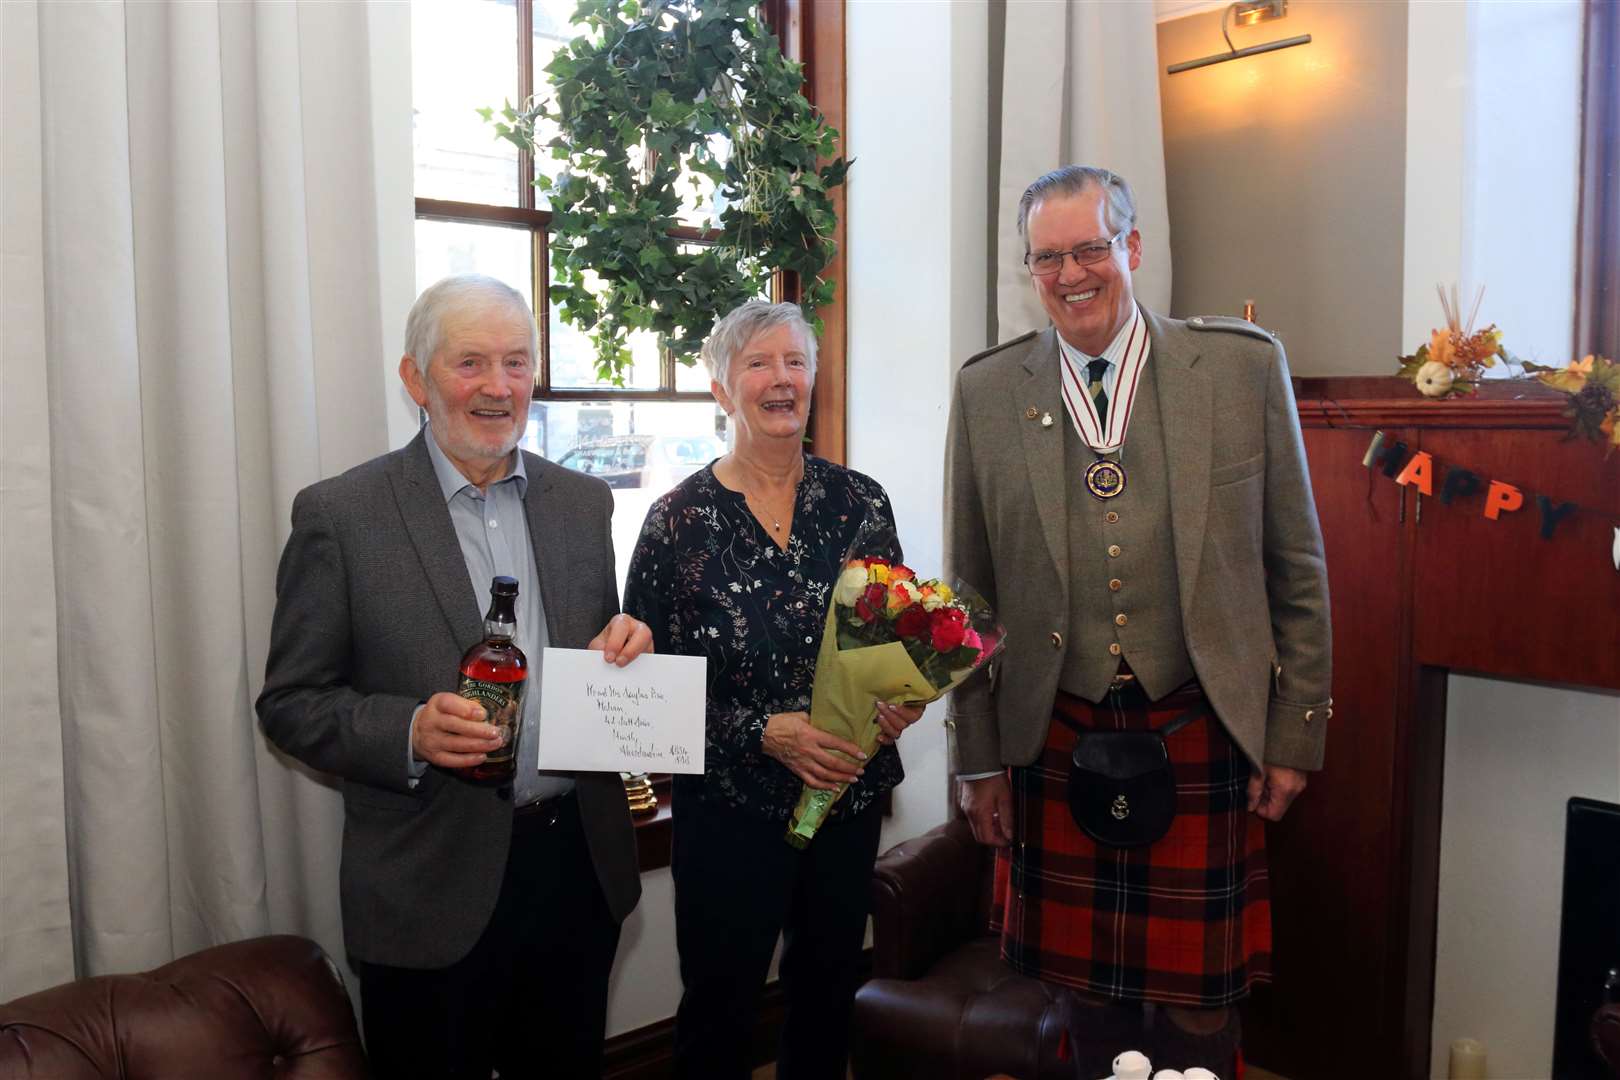 Noni and Douglas Pirie were presented with gifts by Deputy Lord Lieutenant of Aberdeenshire Major Grenville Irvine-Fortescue . Picture: David Porter